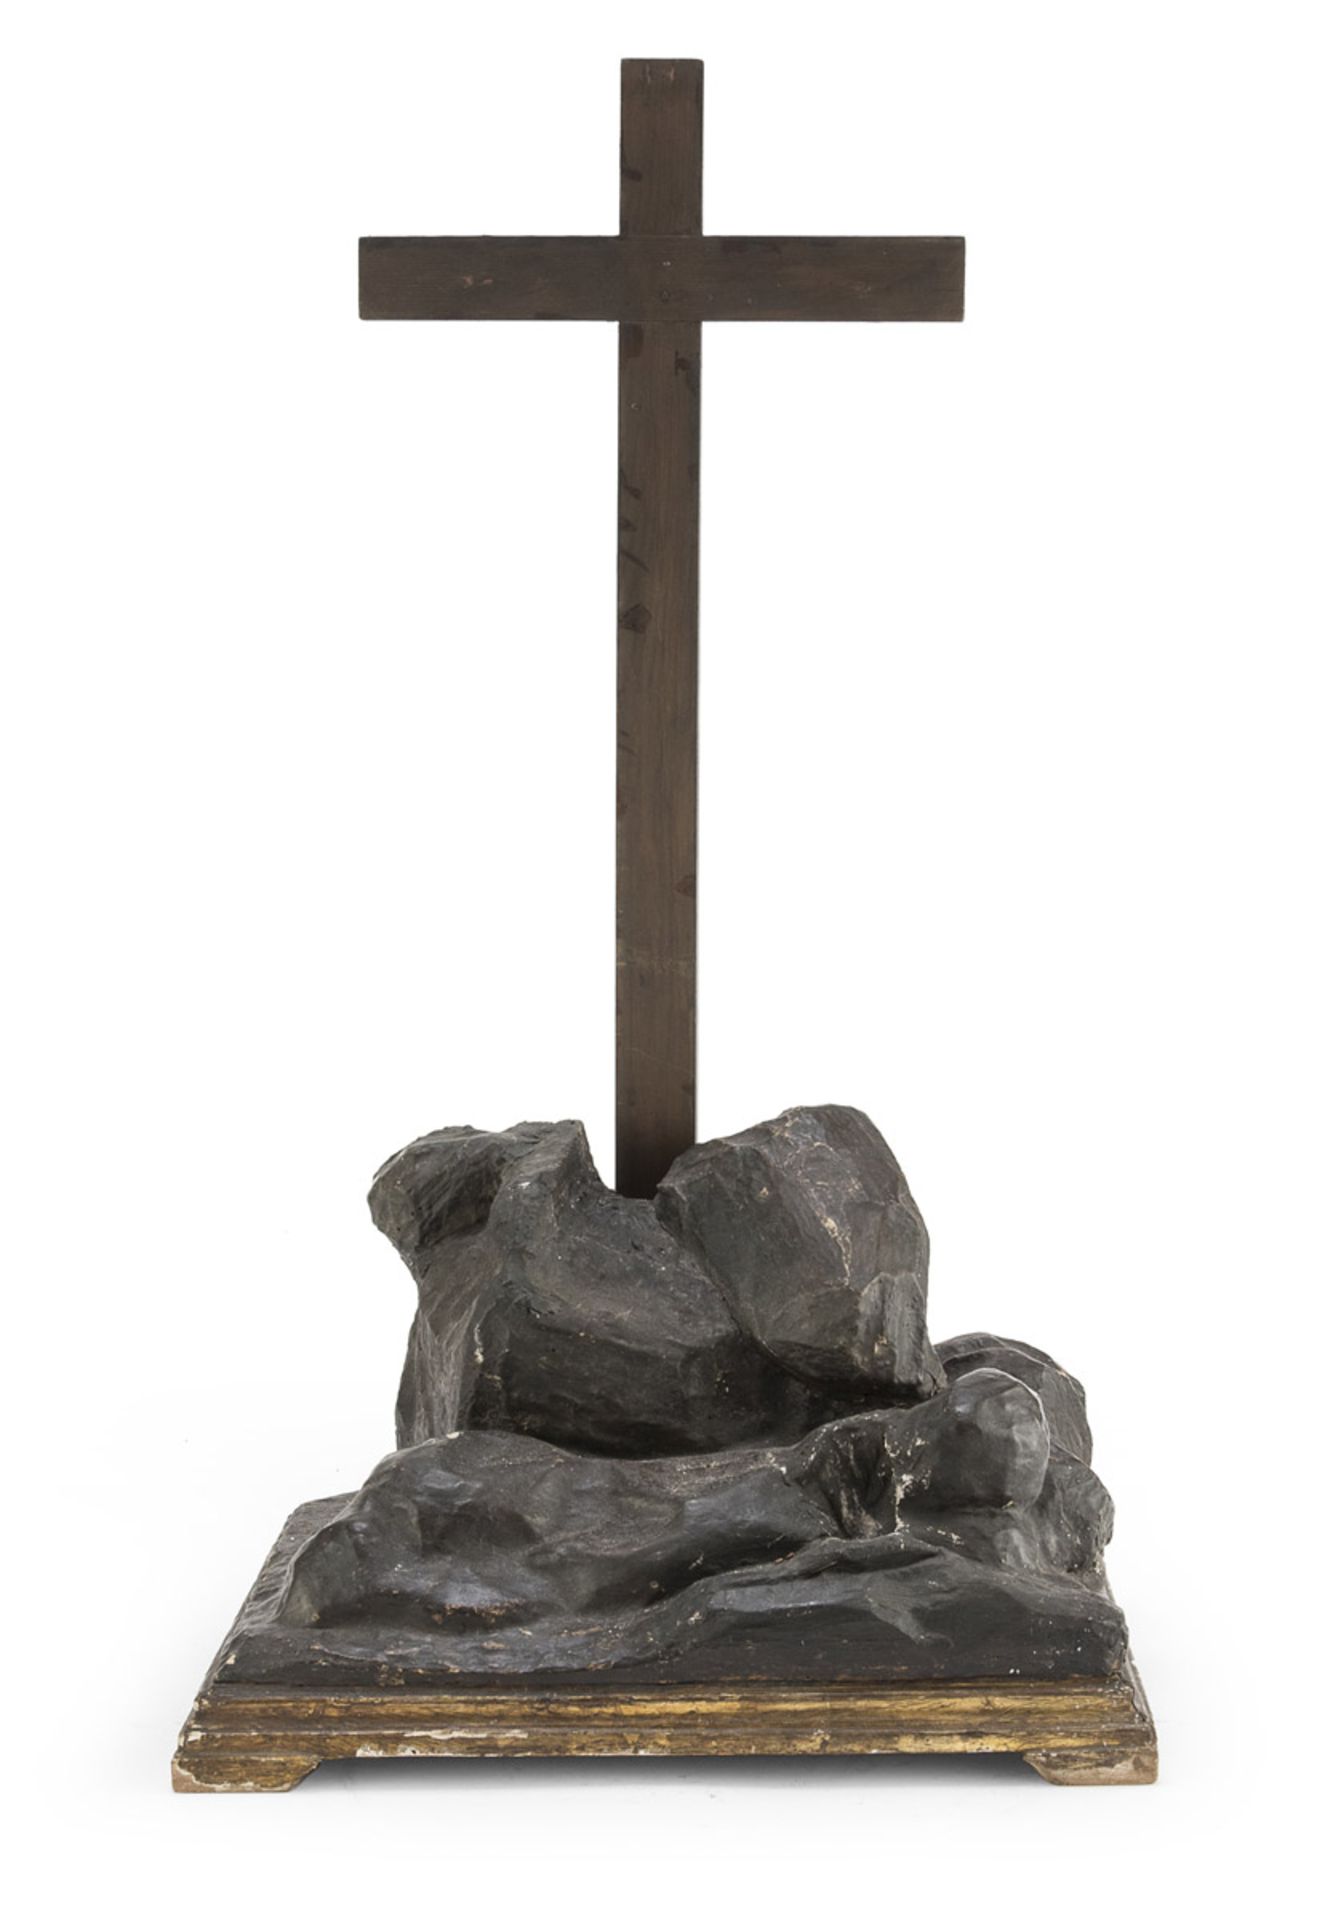 MODEL OF CALVARY IN LACQUERED WOOD - 18TH CENTURY